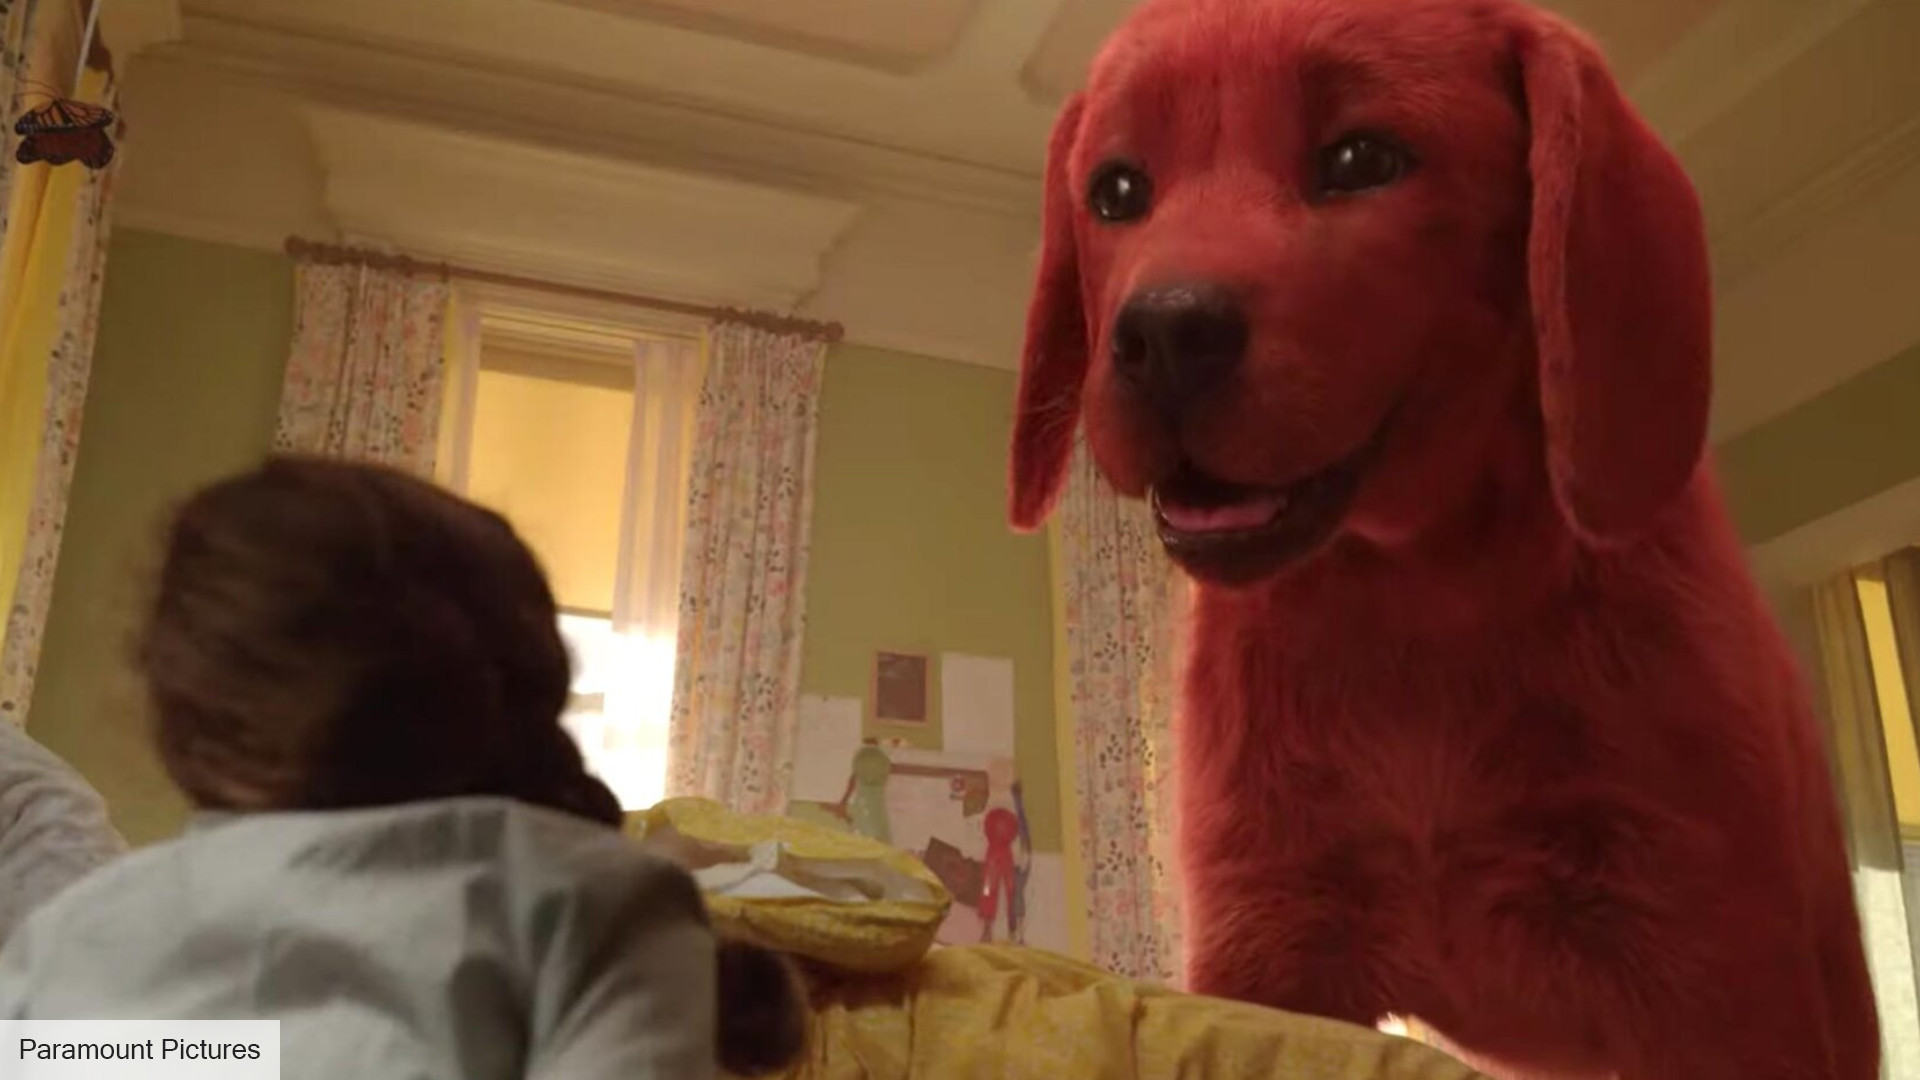 Clifford the Big Red Dog has a new big red release date. The Digital Fix